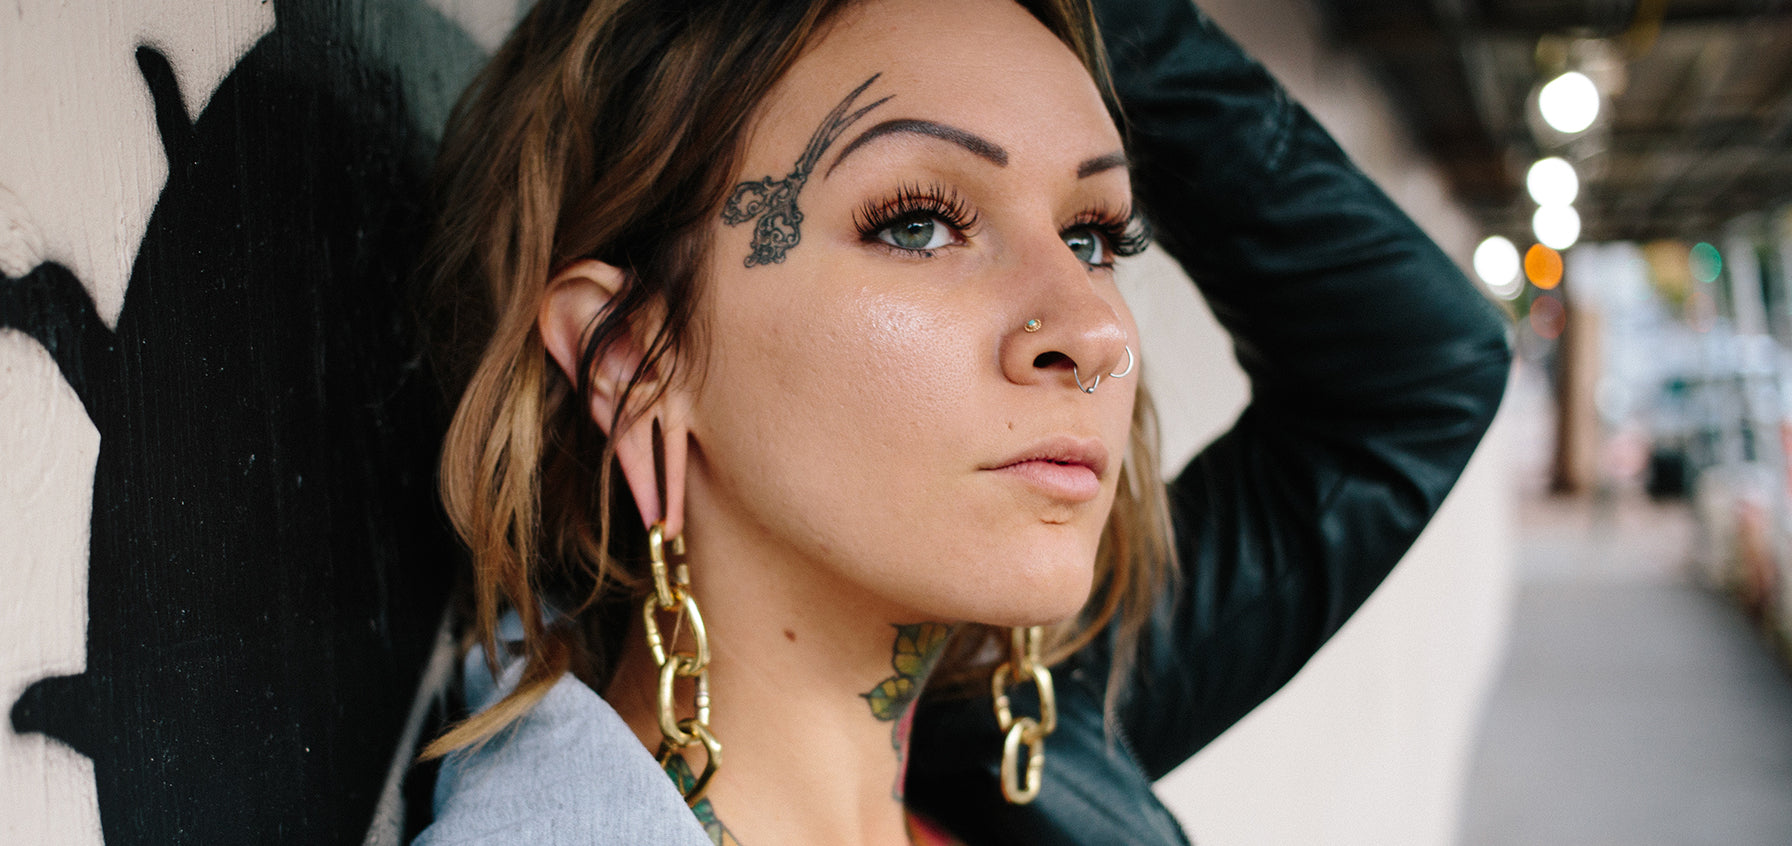 Syge person Sui råb op Selecting Jewelry for Septum Piercing | UrbanBodyJewelry.com